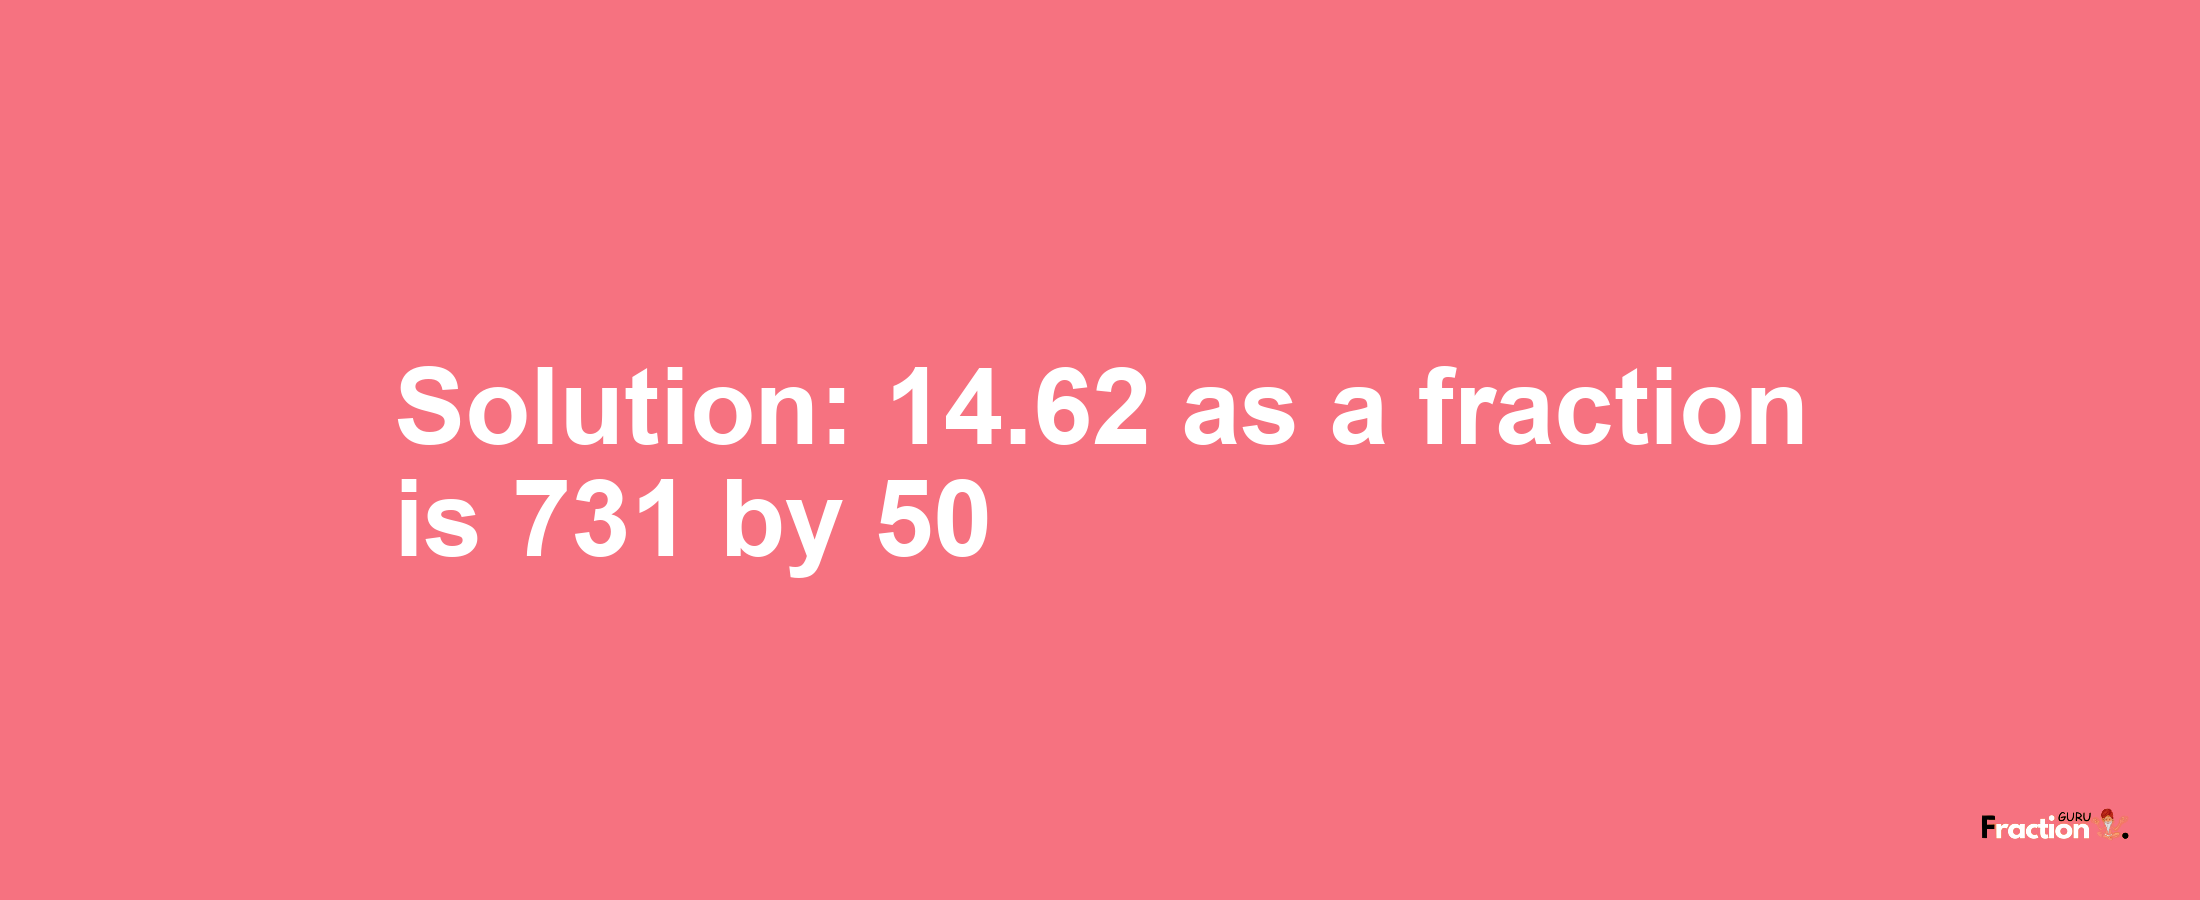 Solution:14.62 as a fraction is 731/50